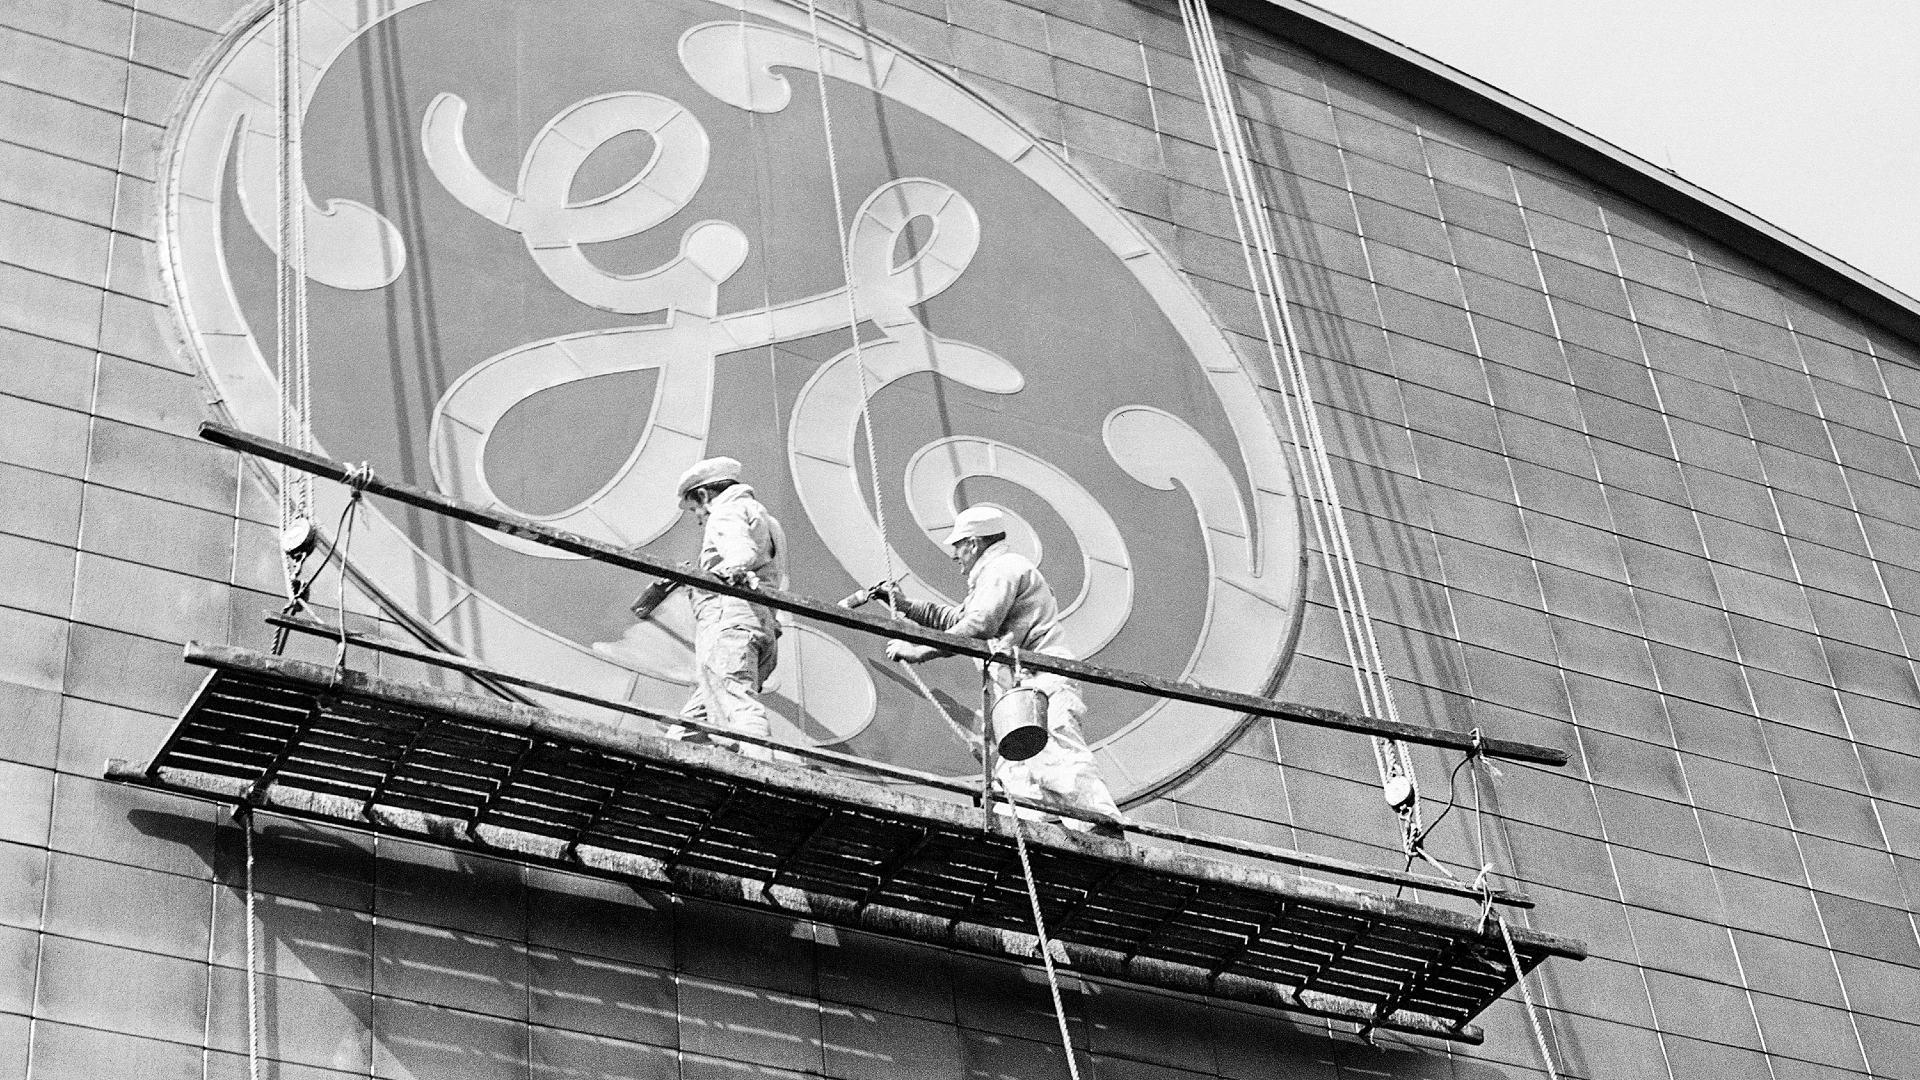 The General Electrics logo, unchanged to this day, is drawn on a building at the New York World's Fair, circa 1935-45. (Courtesy of Taschen)